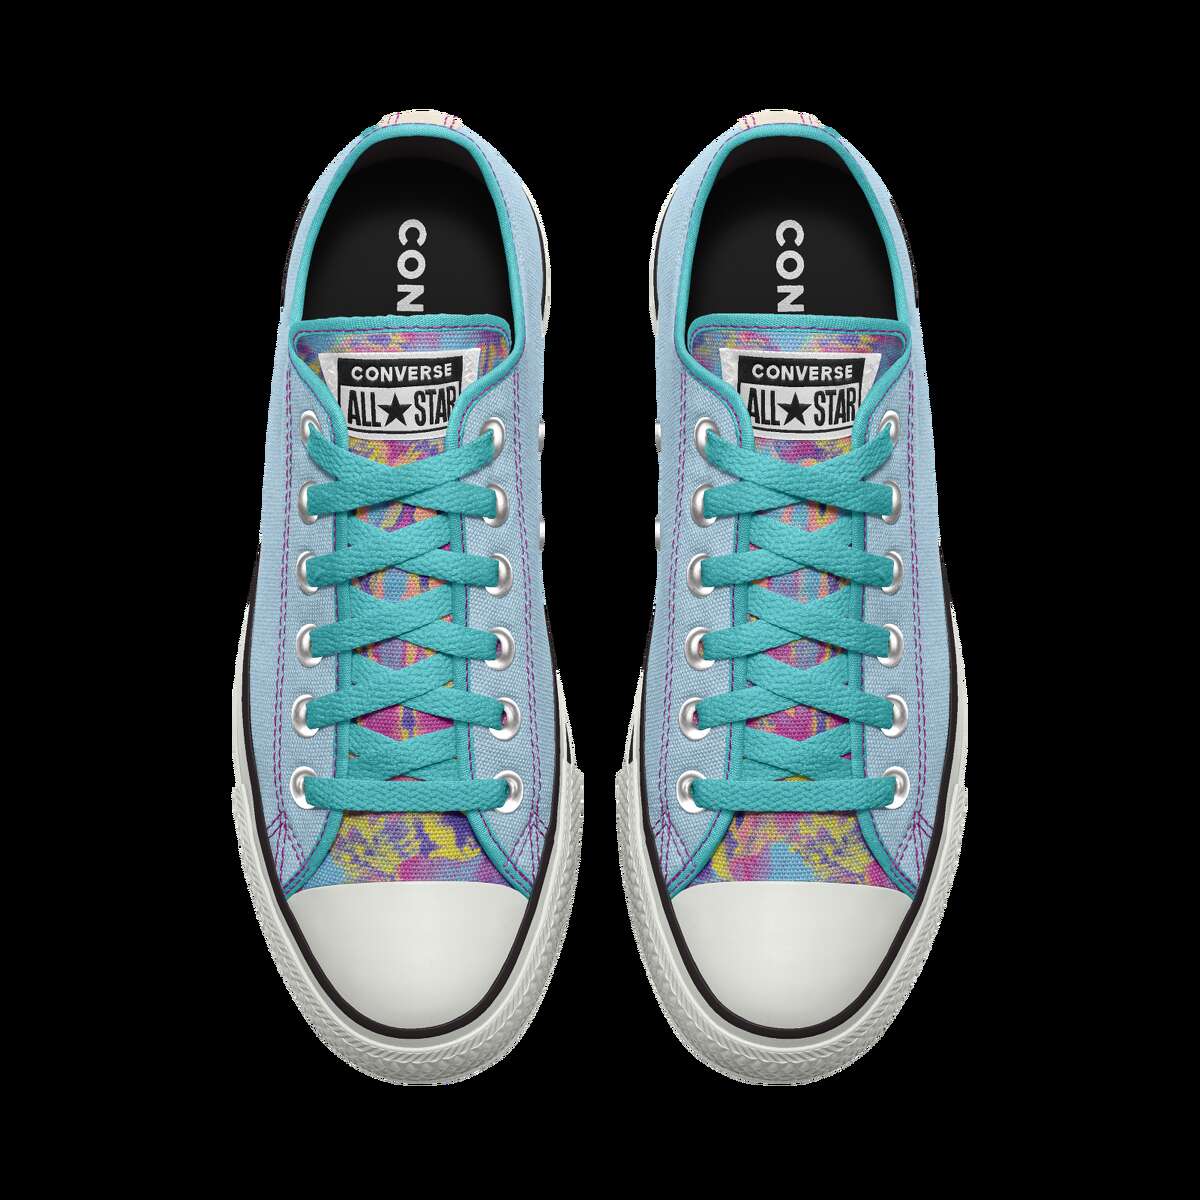 Help: I've spent all day customizing shoes at the Converse website